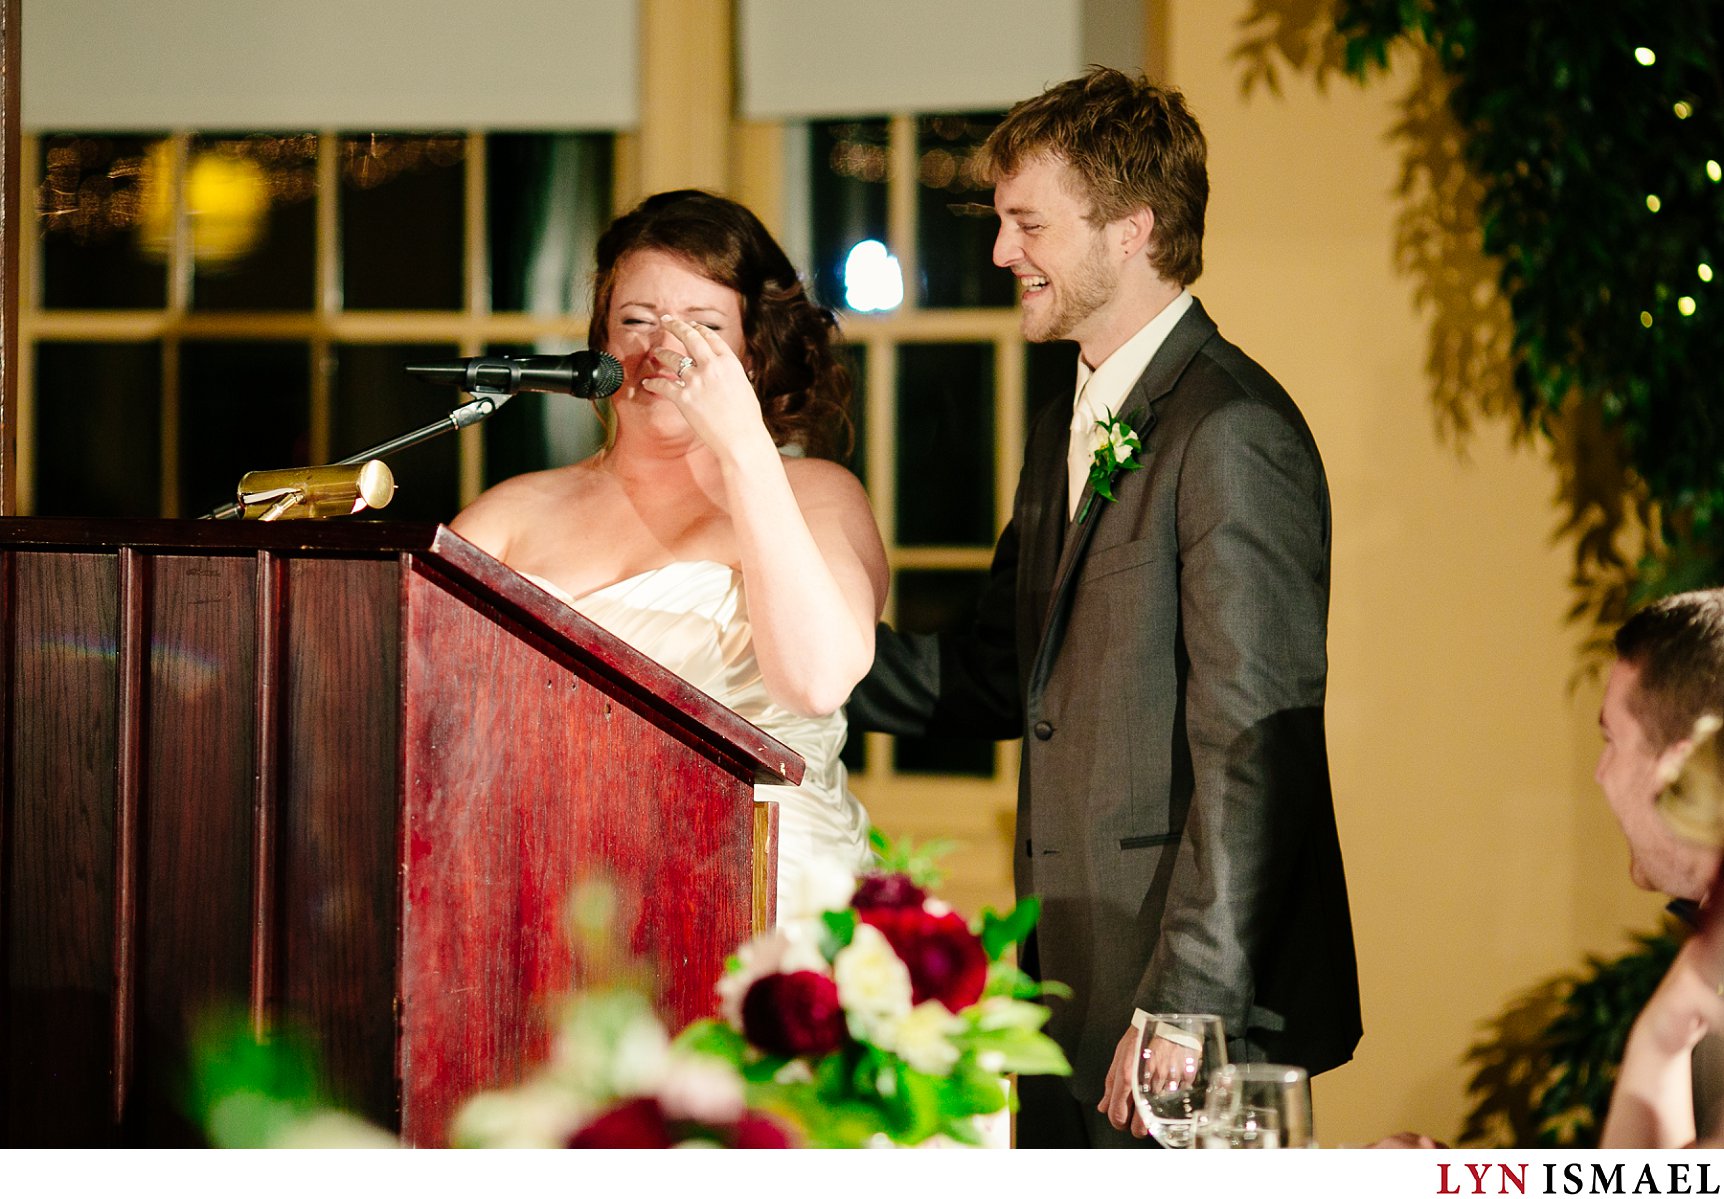 An emotional moment of the bride trying to deliver a speech.